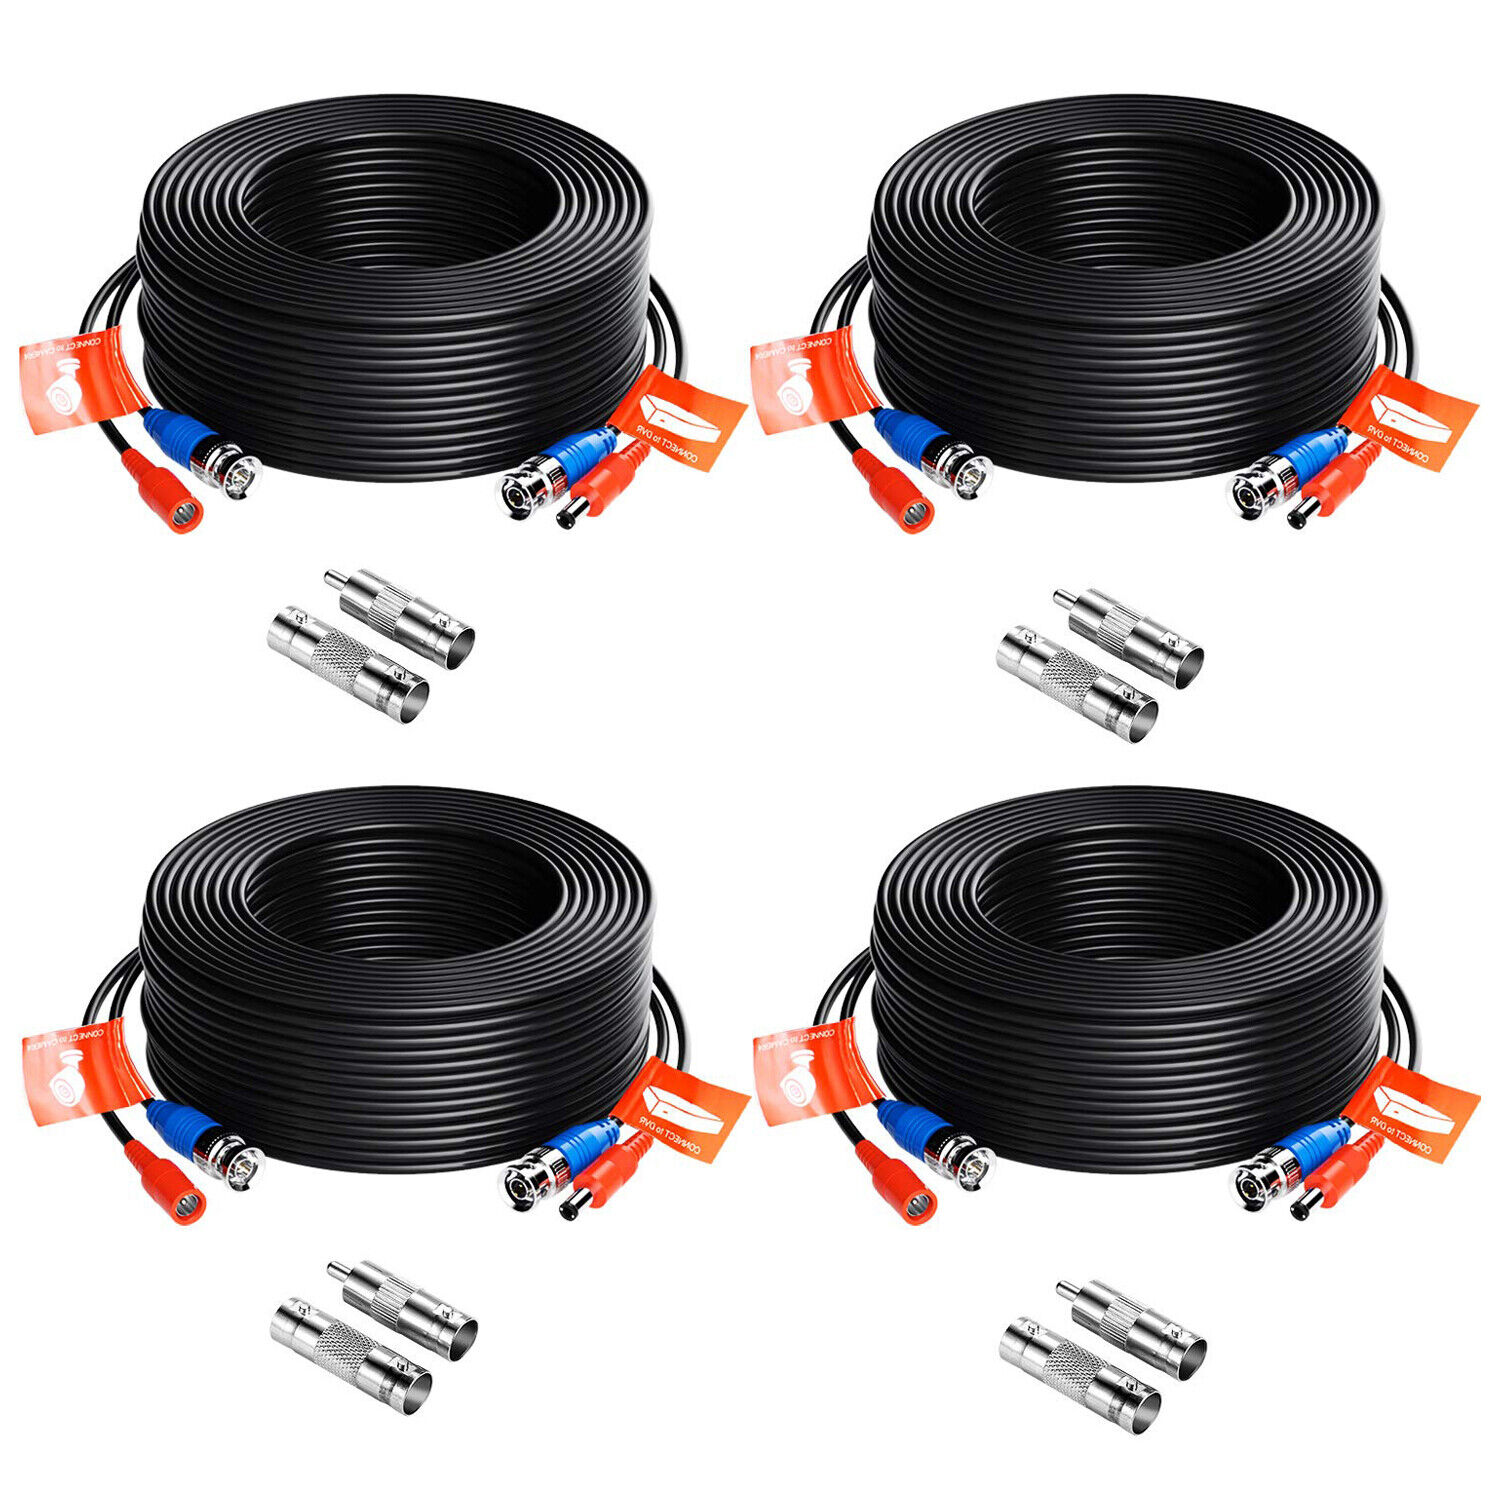 ZOSI 4pcs 100ft Video Power Cable BNC RCA Cord Wire for Security Camera System